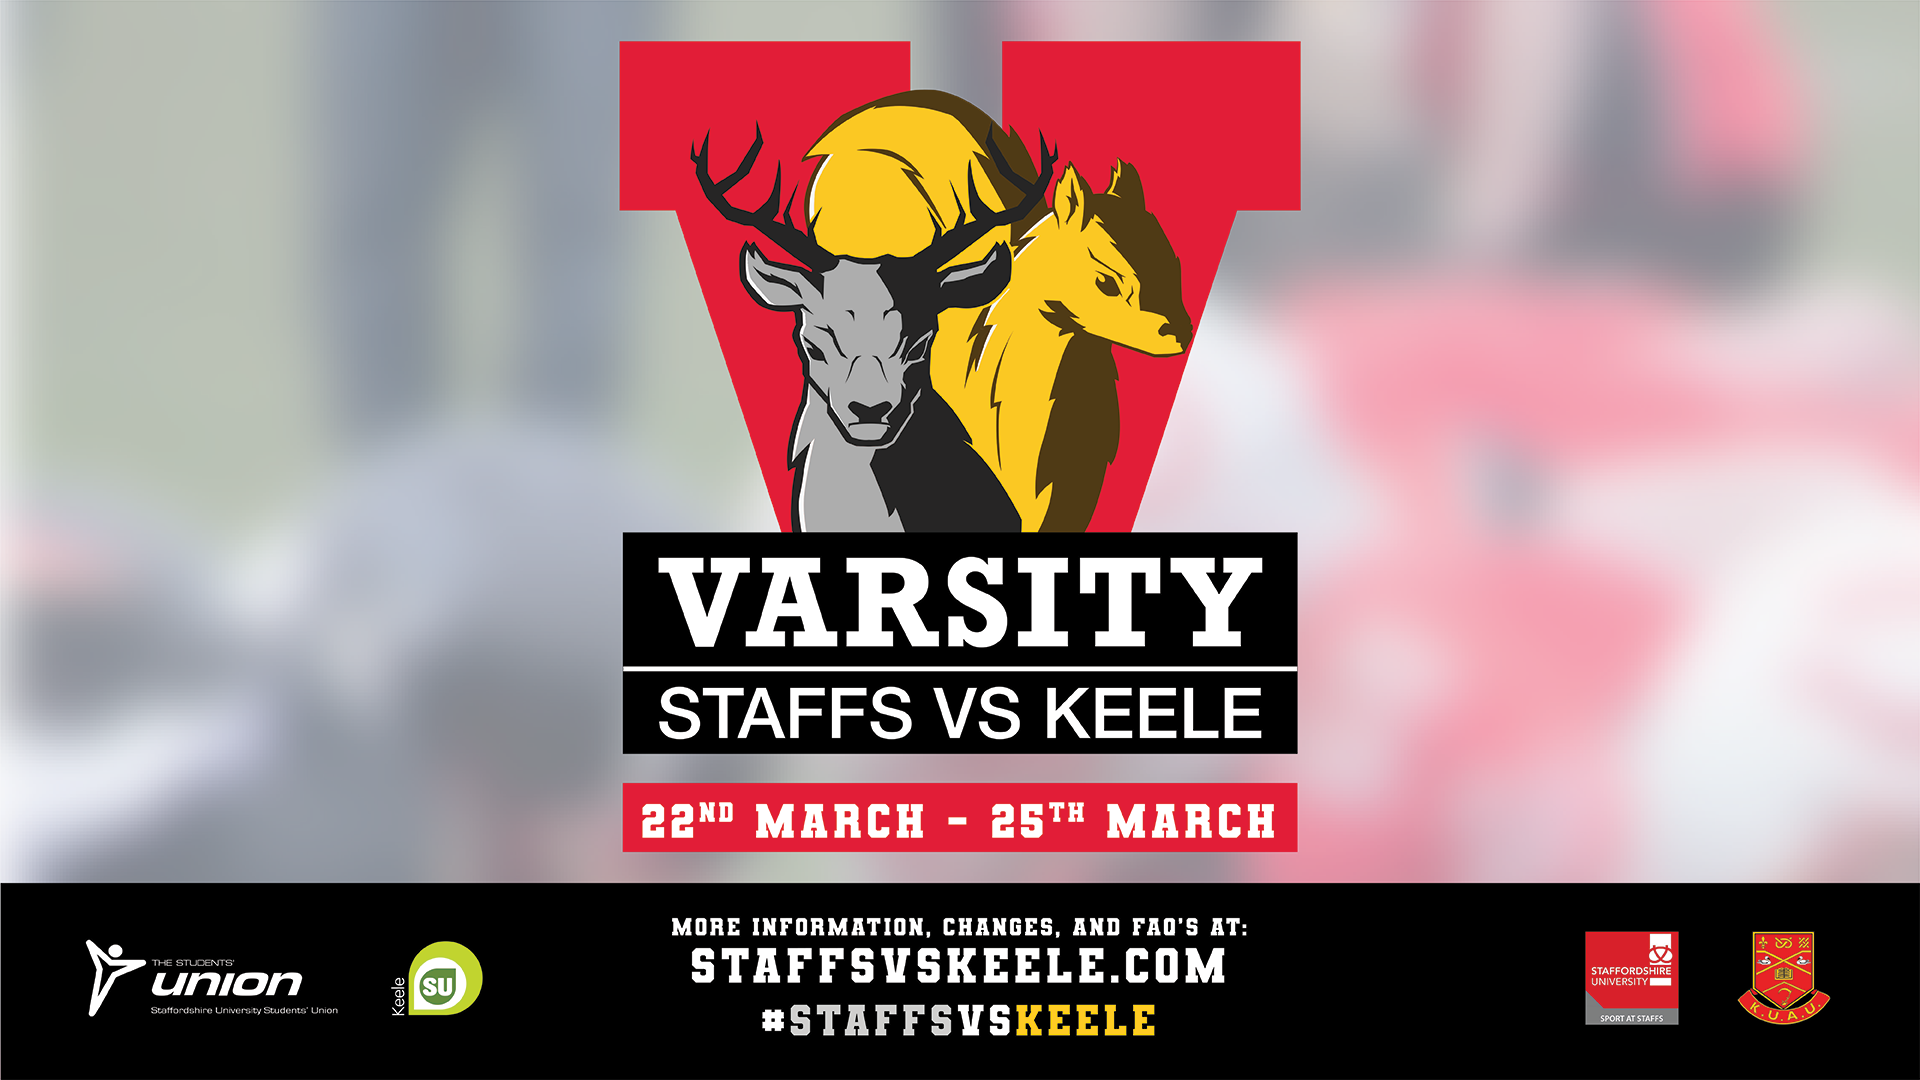 One Team One Mission 31st March - 3rd April - Team Keele Varsity Logo with 10 stars in the centre